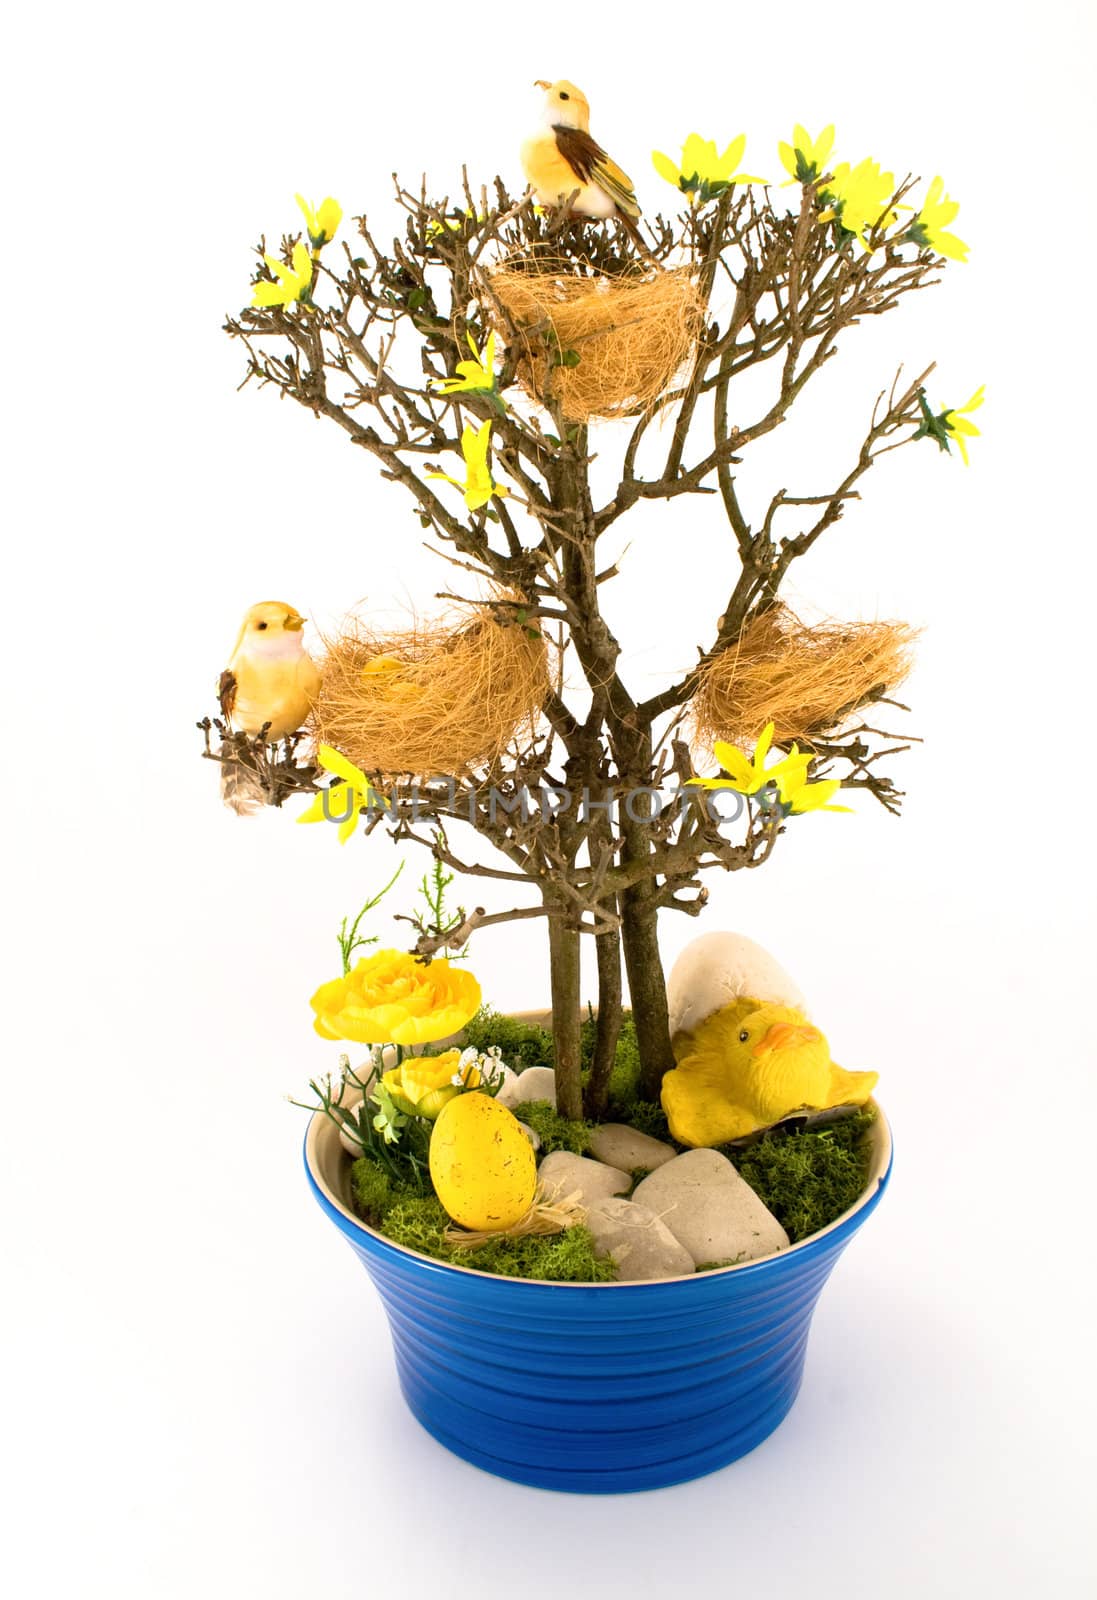 Easter tree in blue pot with birds, nests and eggs. On white backgroudn.